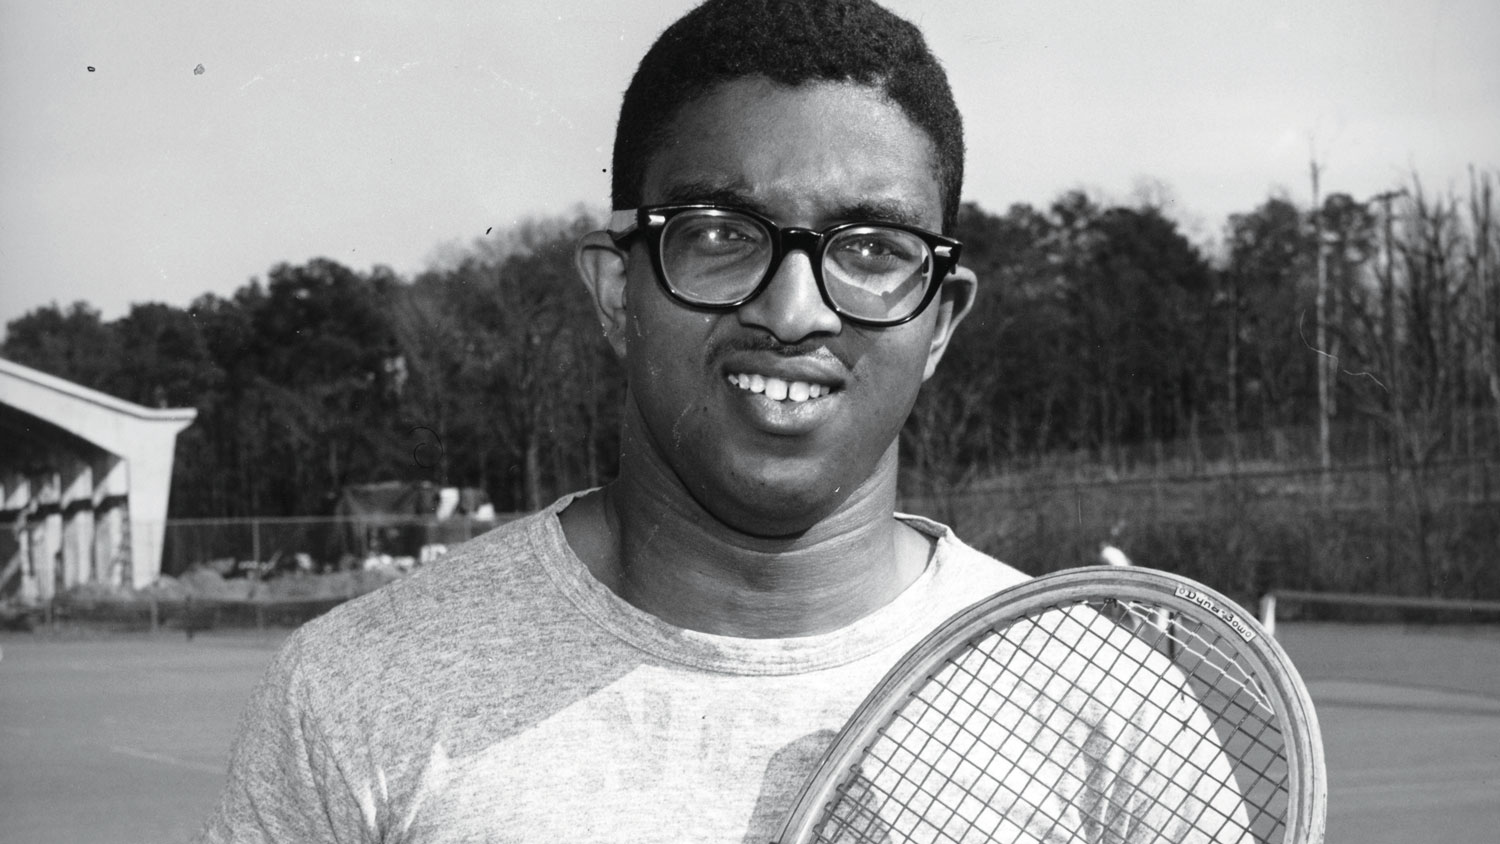 A black and white photo of Irwin Holmes, one of the first African American undergraduate students at NC State, standing with a tennis racket.